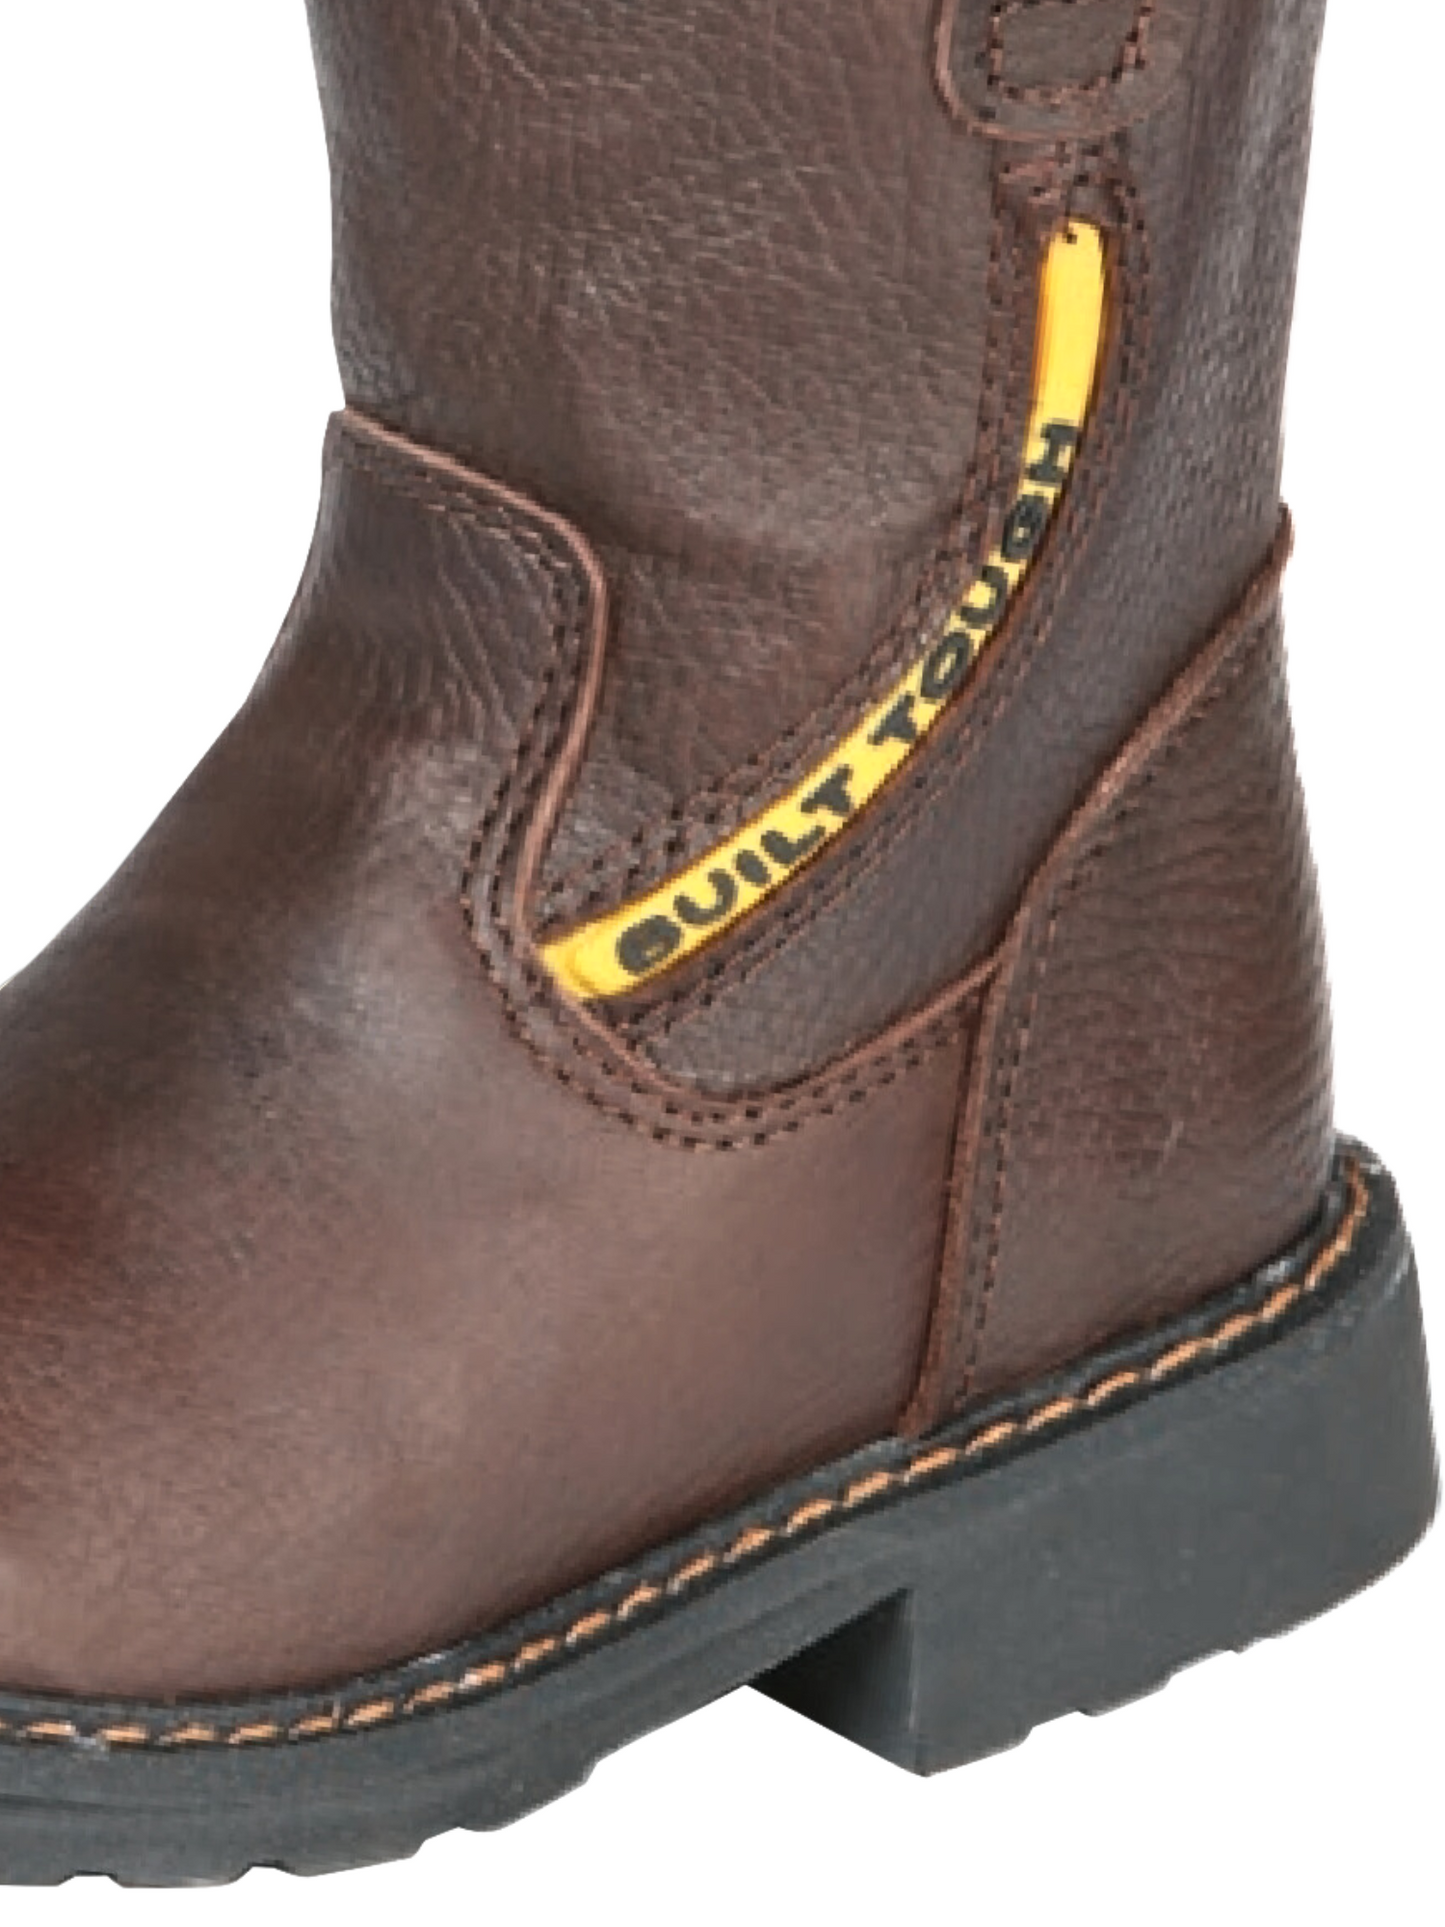 Kids - Classic Genuine Leather Rodeo Cowboy Boots for Children 'Jar Boots' - ID: 126594